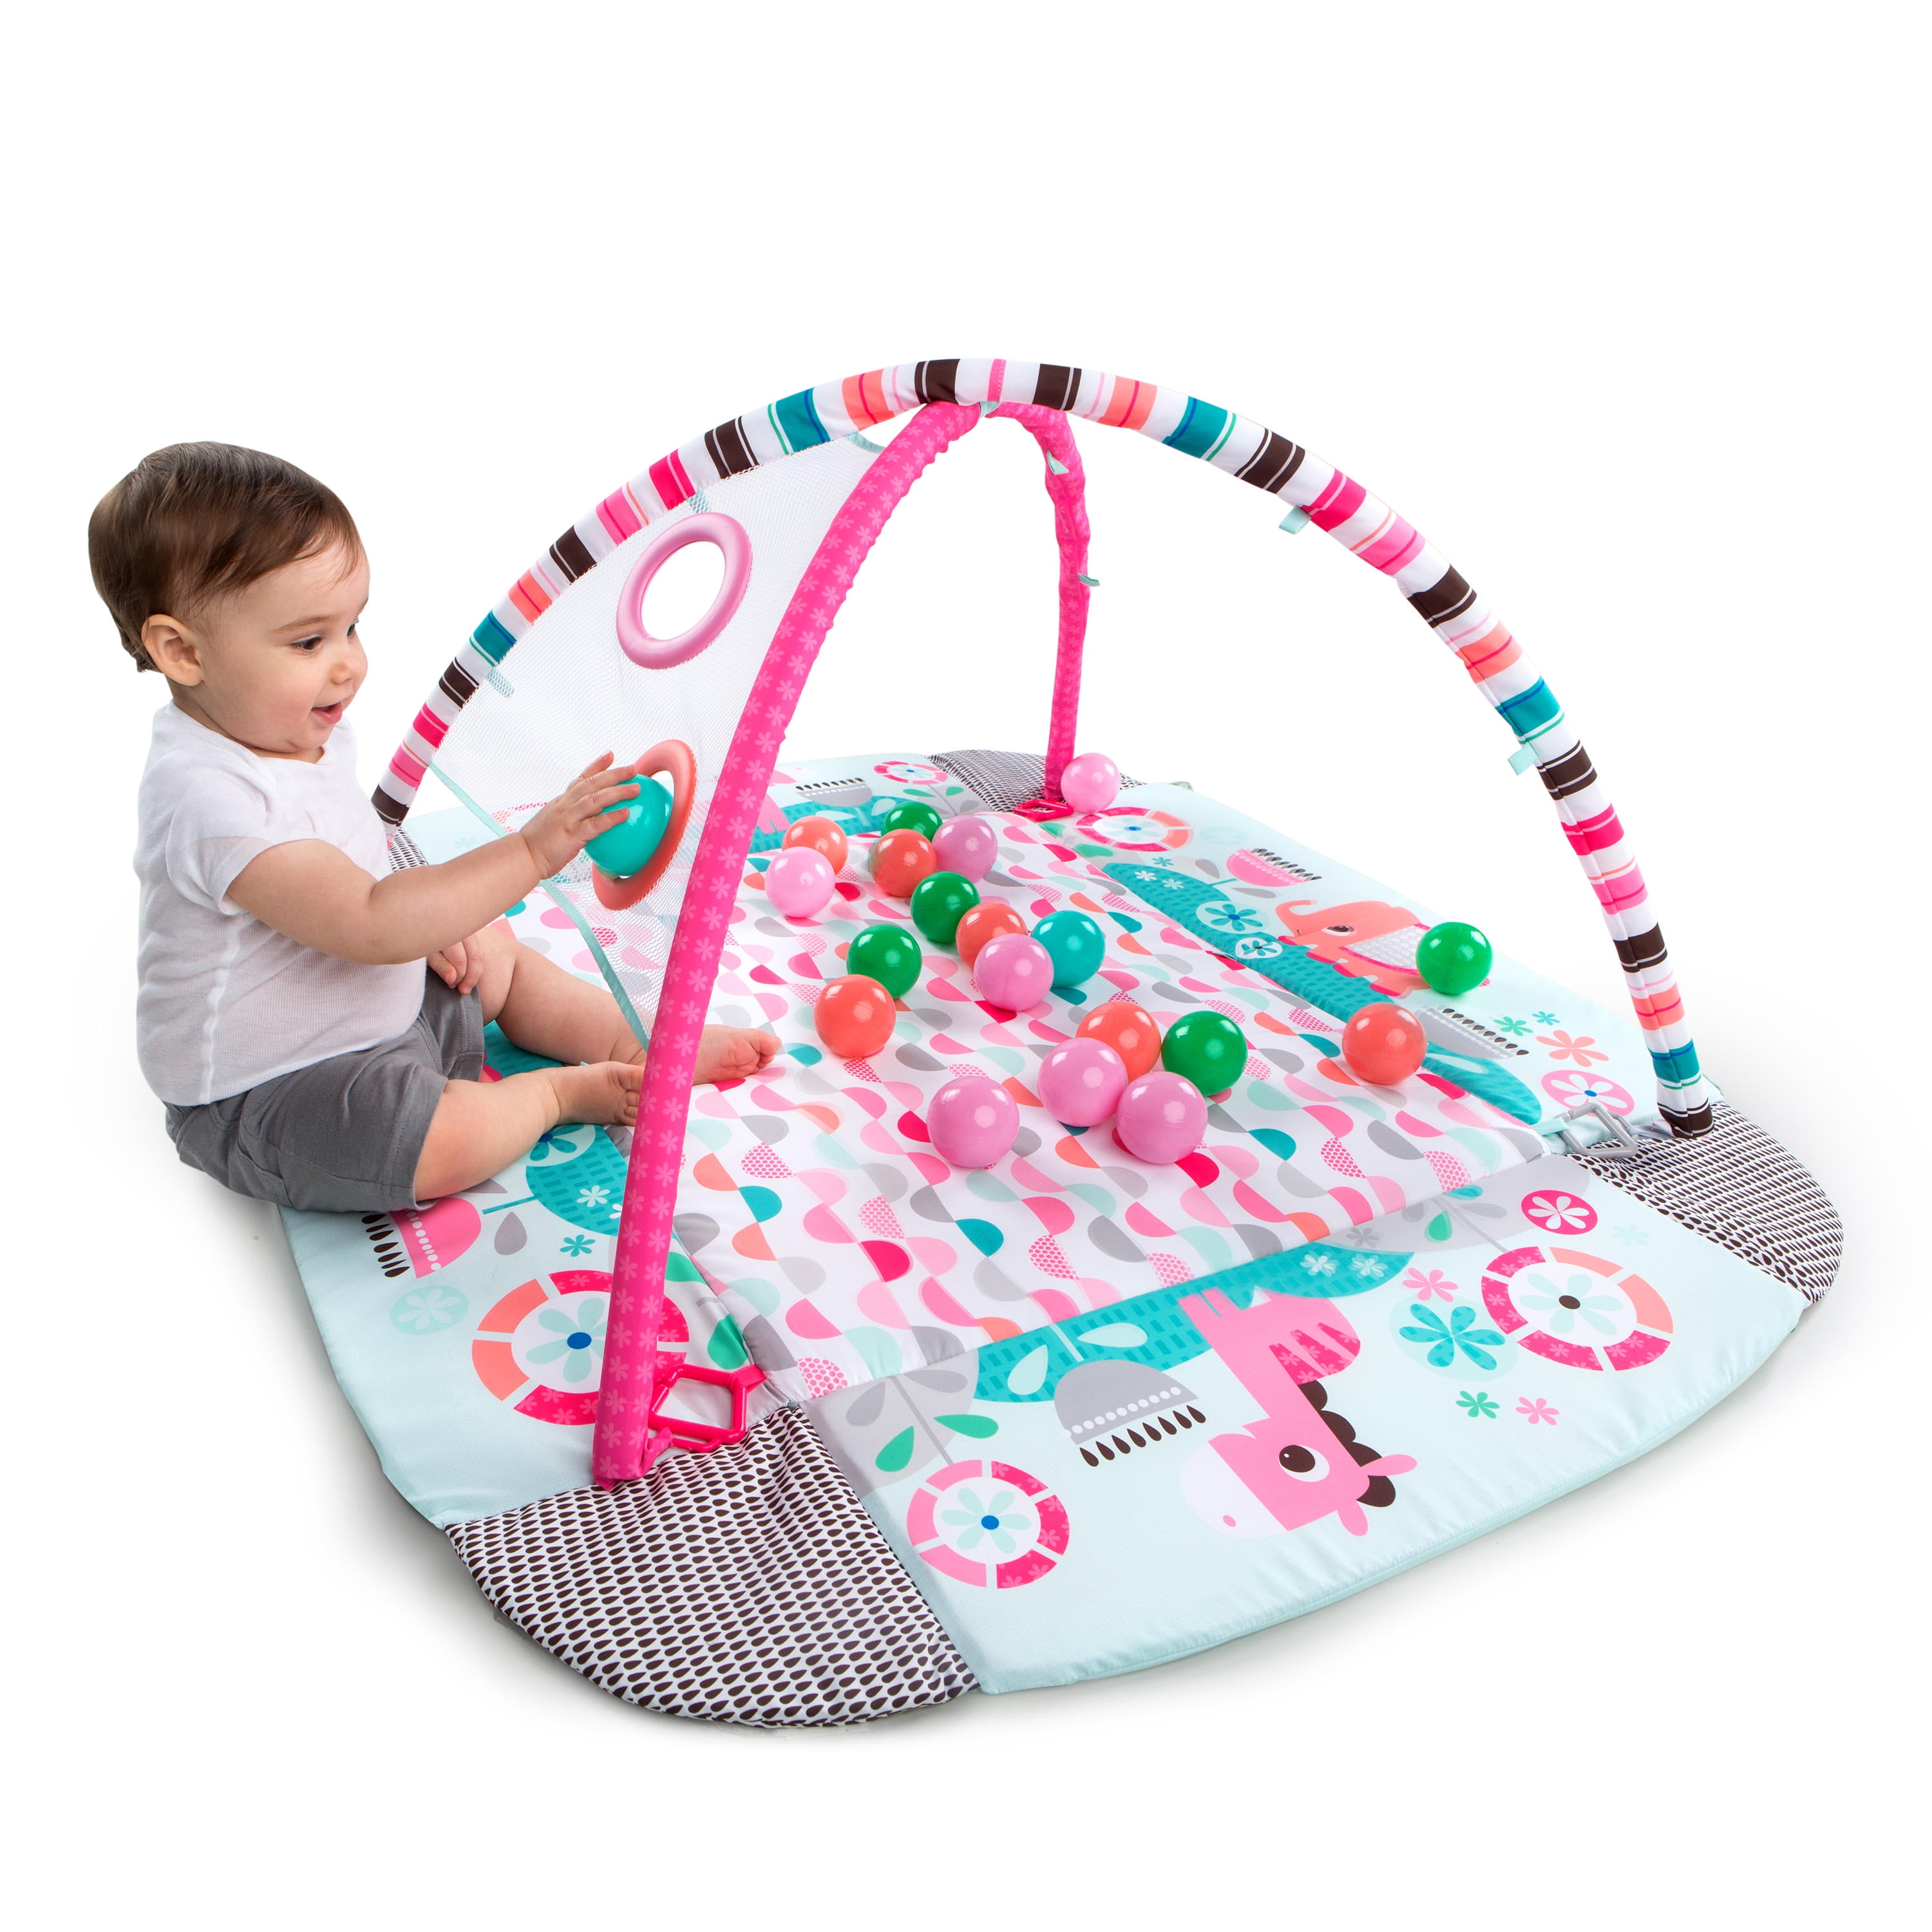 Bright Starts 5-in-1 Your Way Ball Play Baby Activity Play Gym & Ball Pit,  Includes 7 Toys, Newborn to Toddler - Rainbow Tropics (Pink)